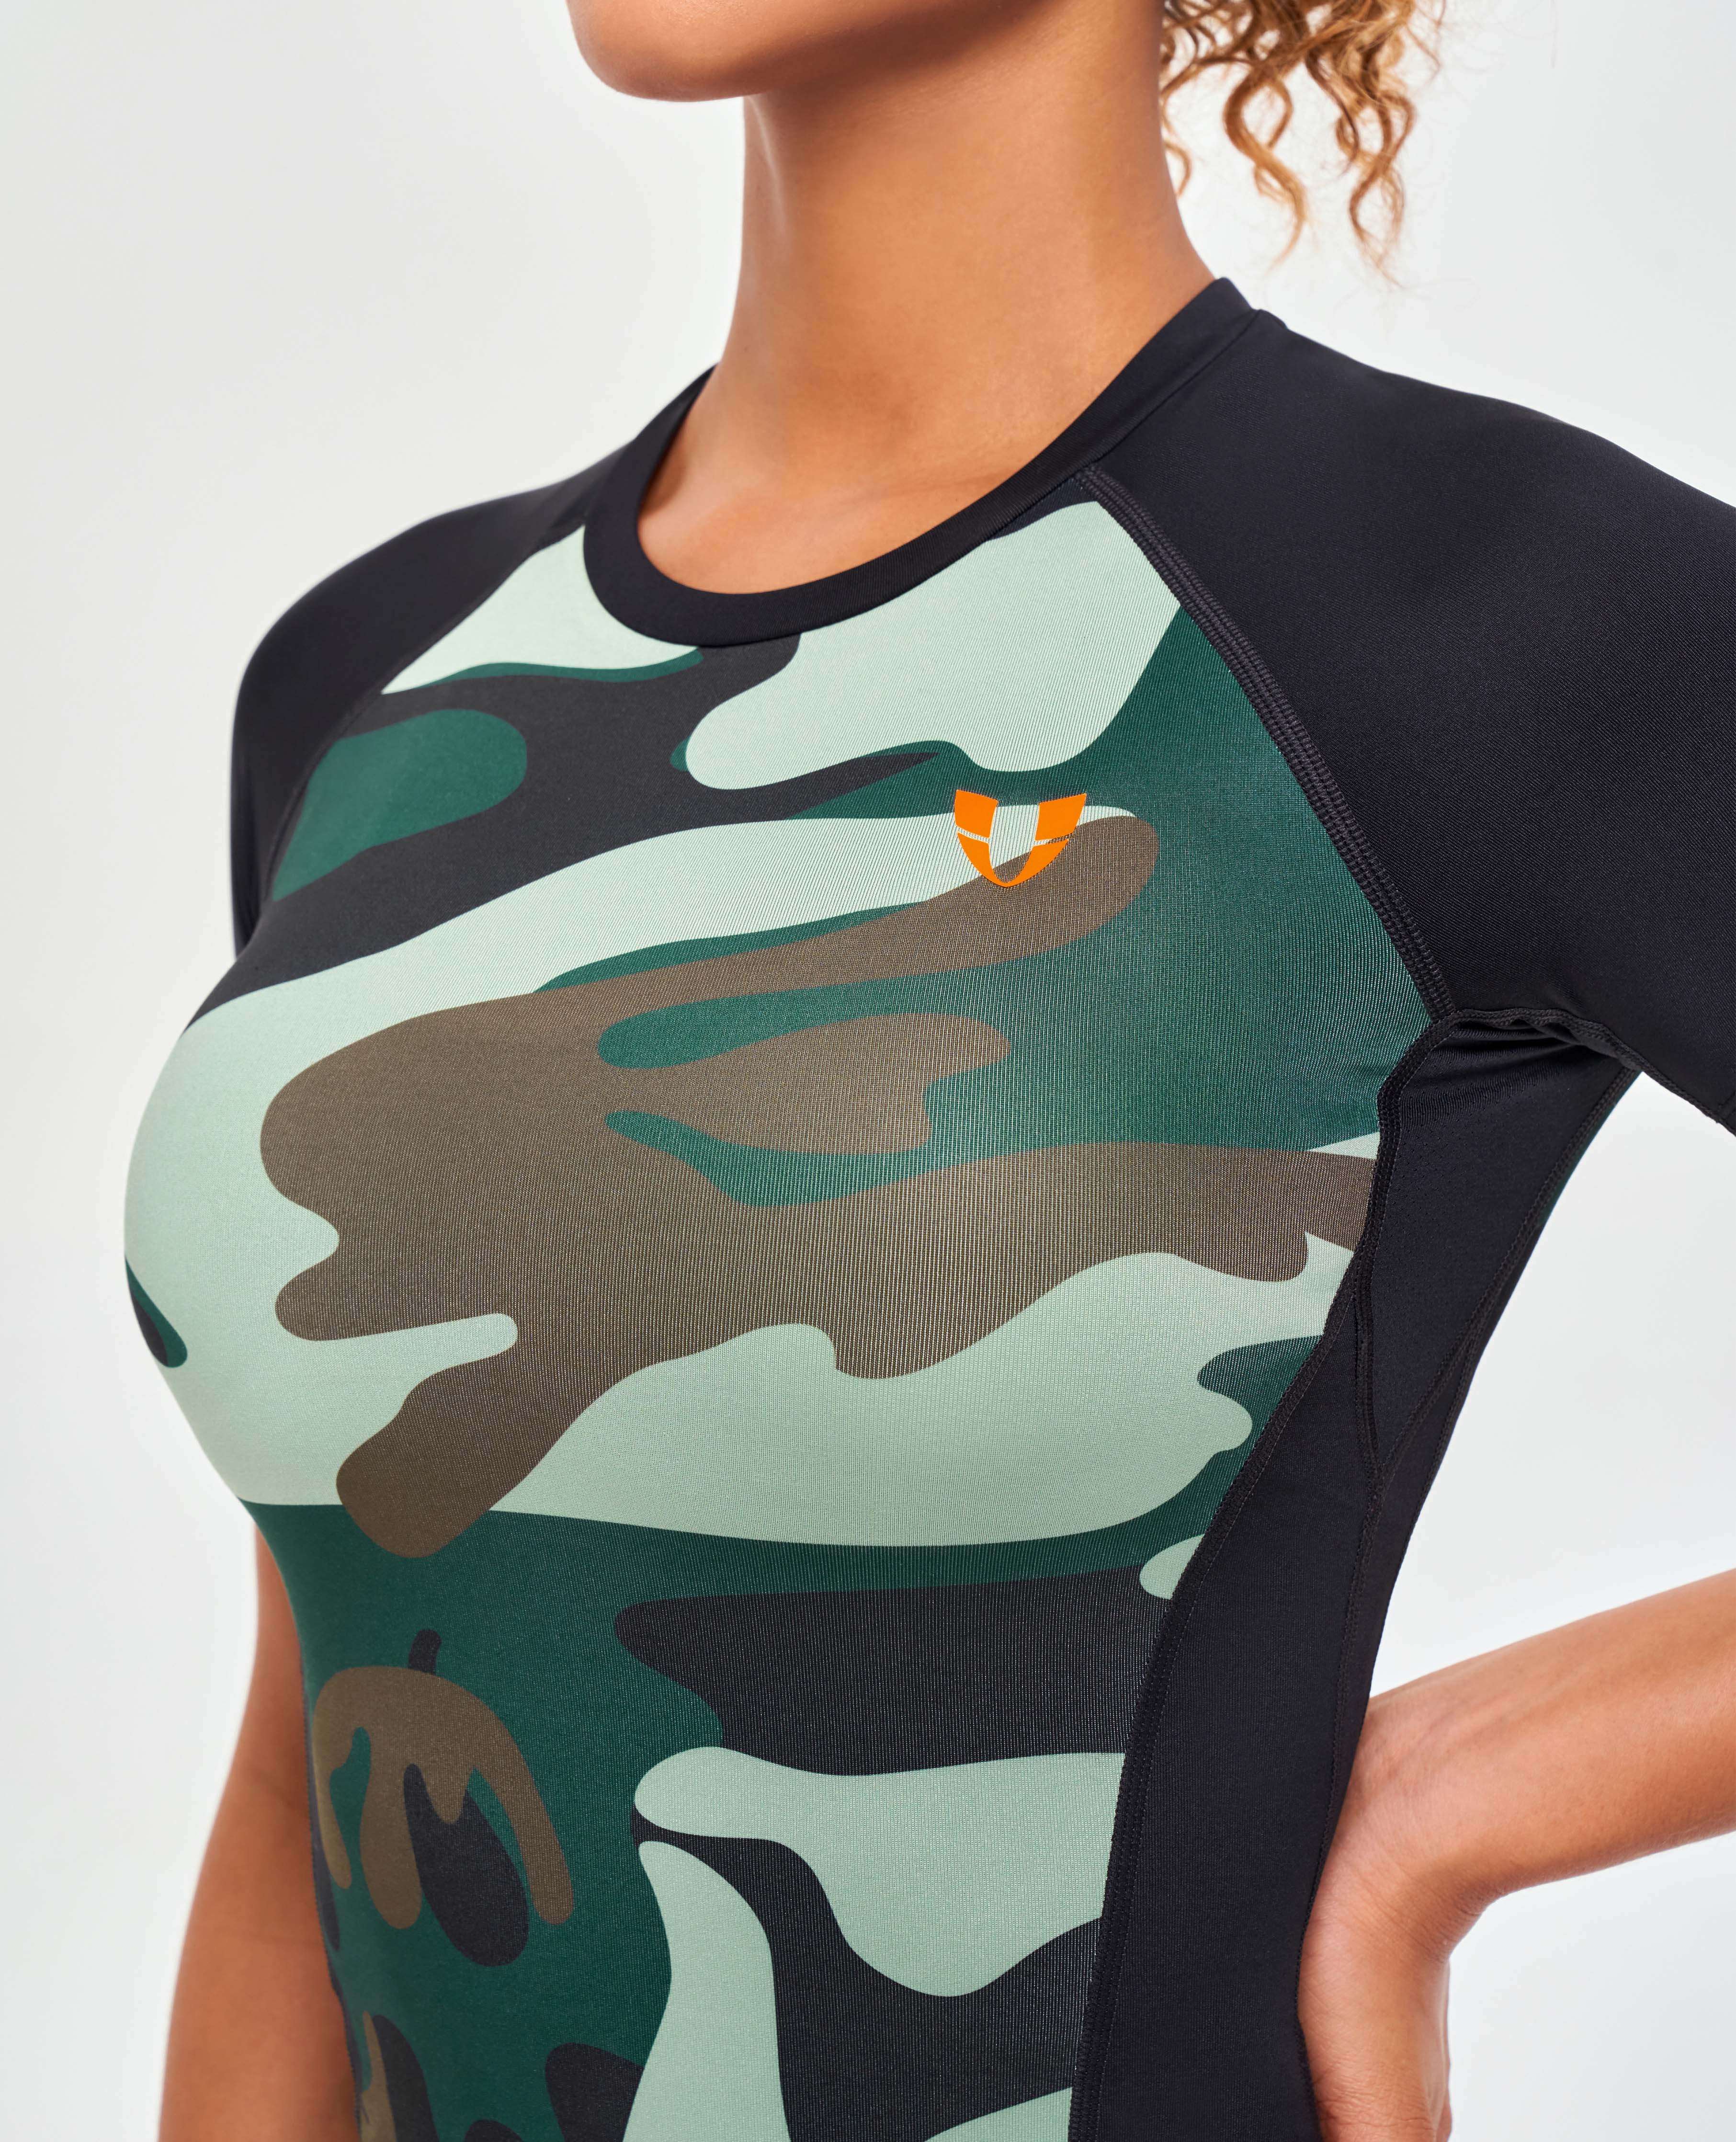 Contrast Color T-shirt - Green Camo and Black